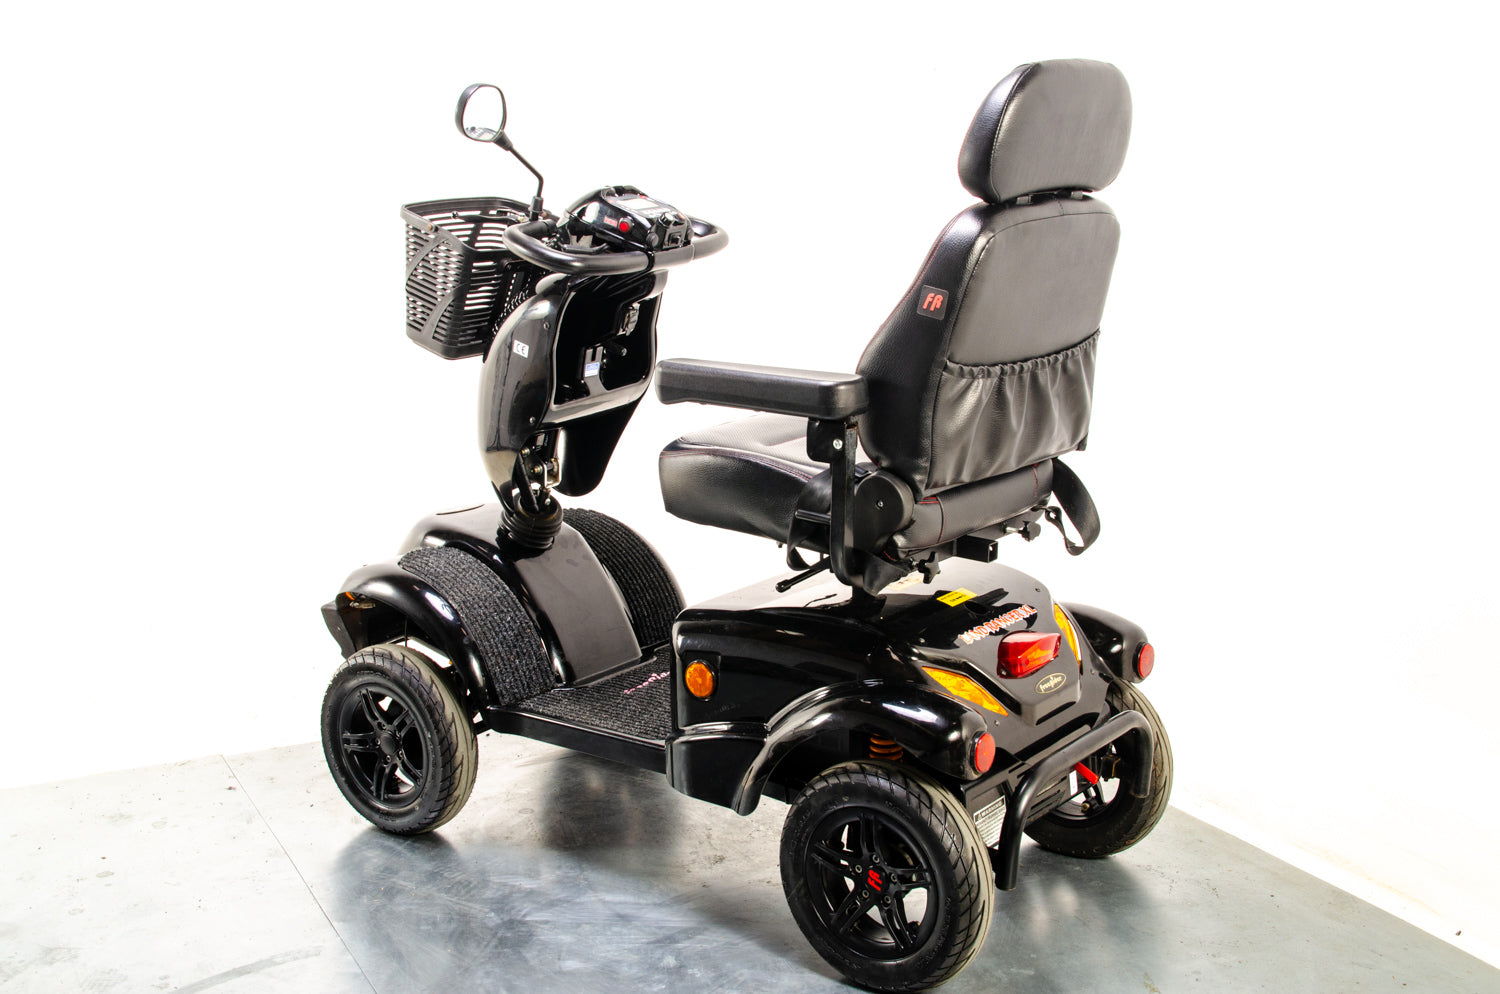 Freerider Landranger XL8 8mph Used Mobility Scooter All-Terrain Off-Road Road Legal Large 03526